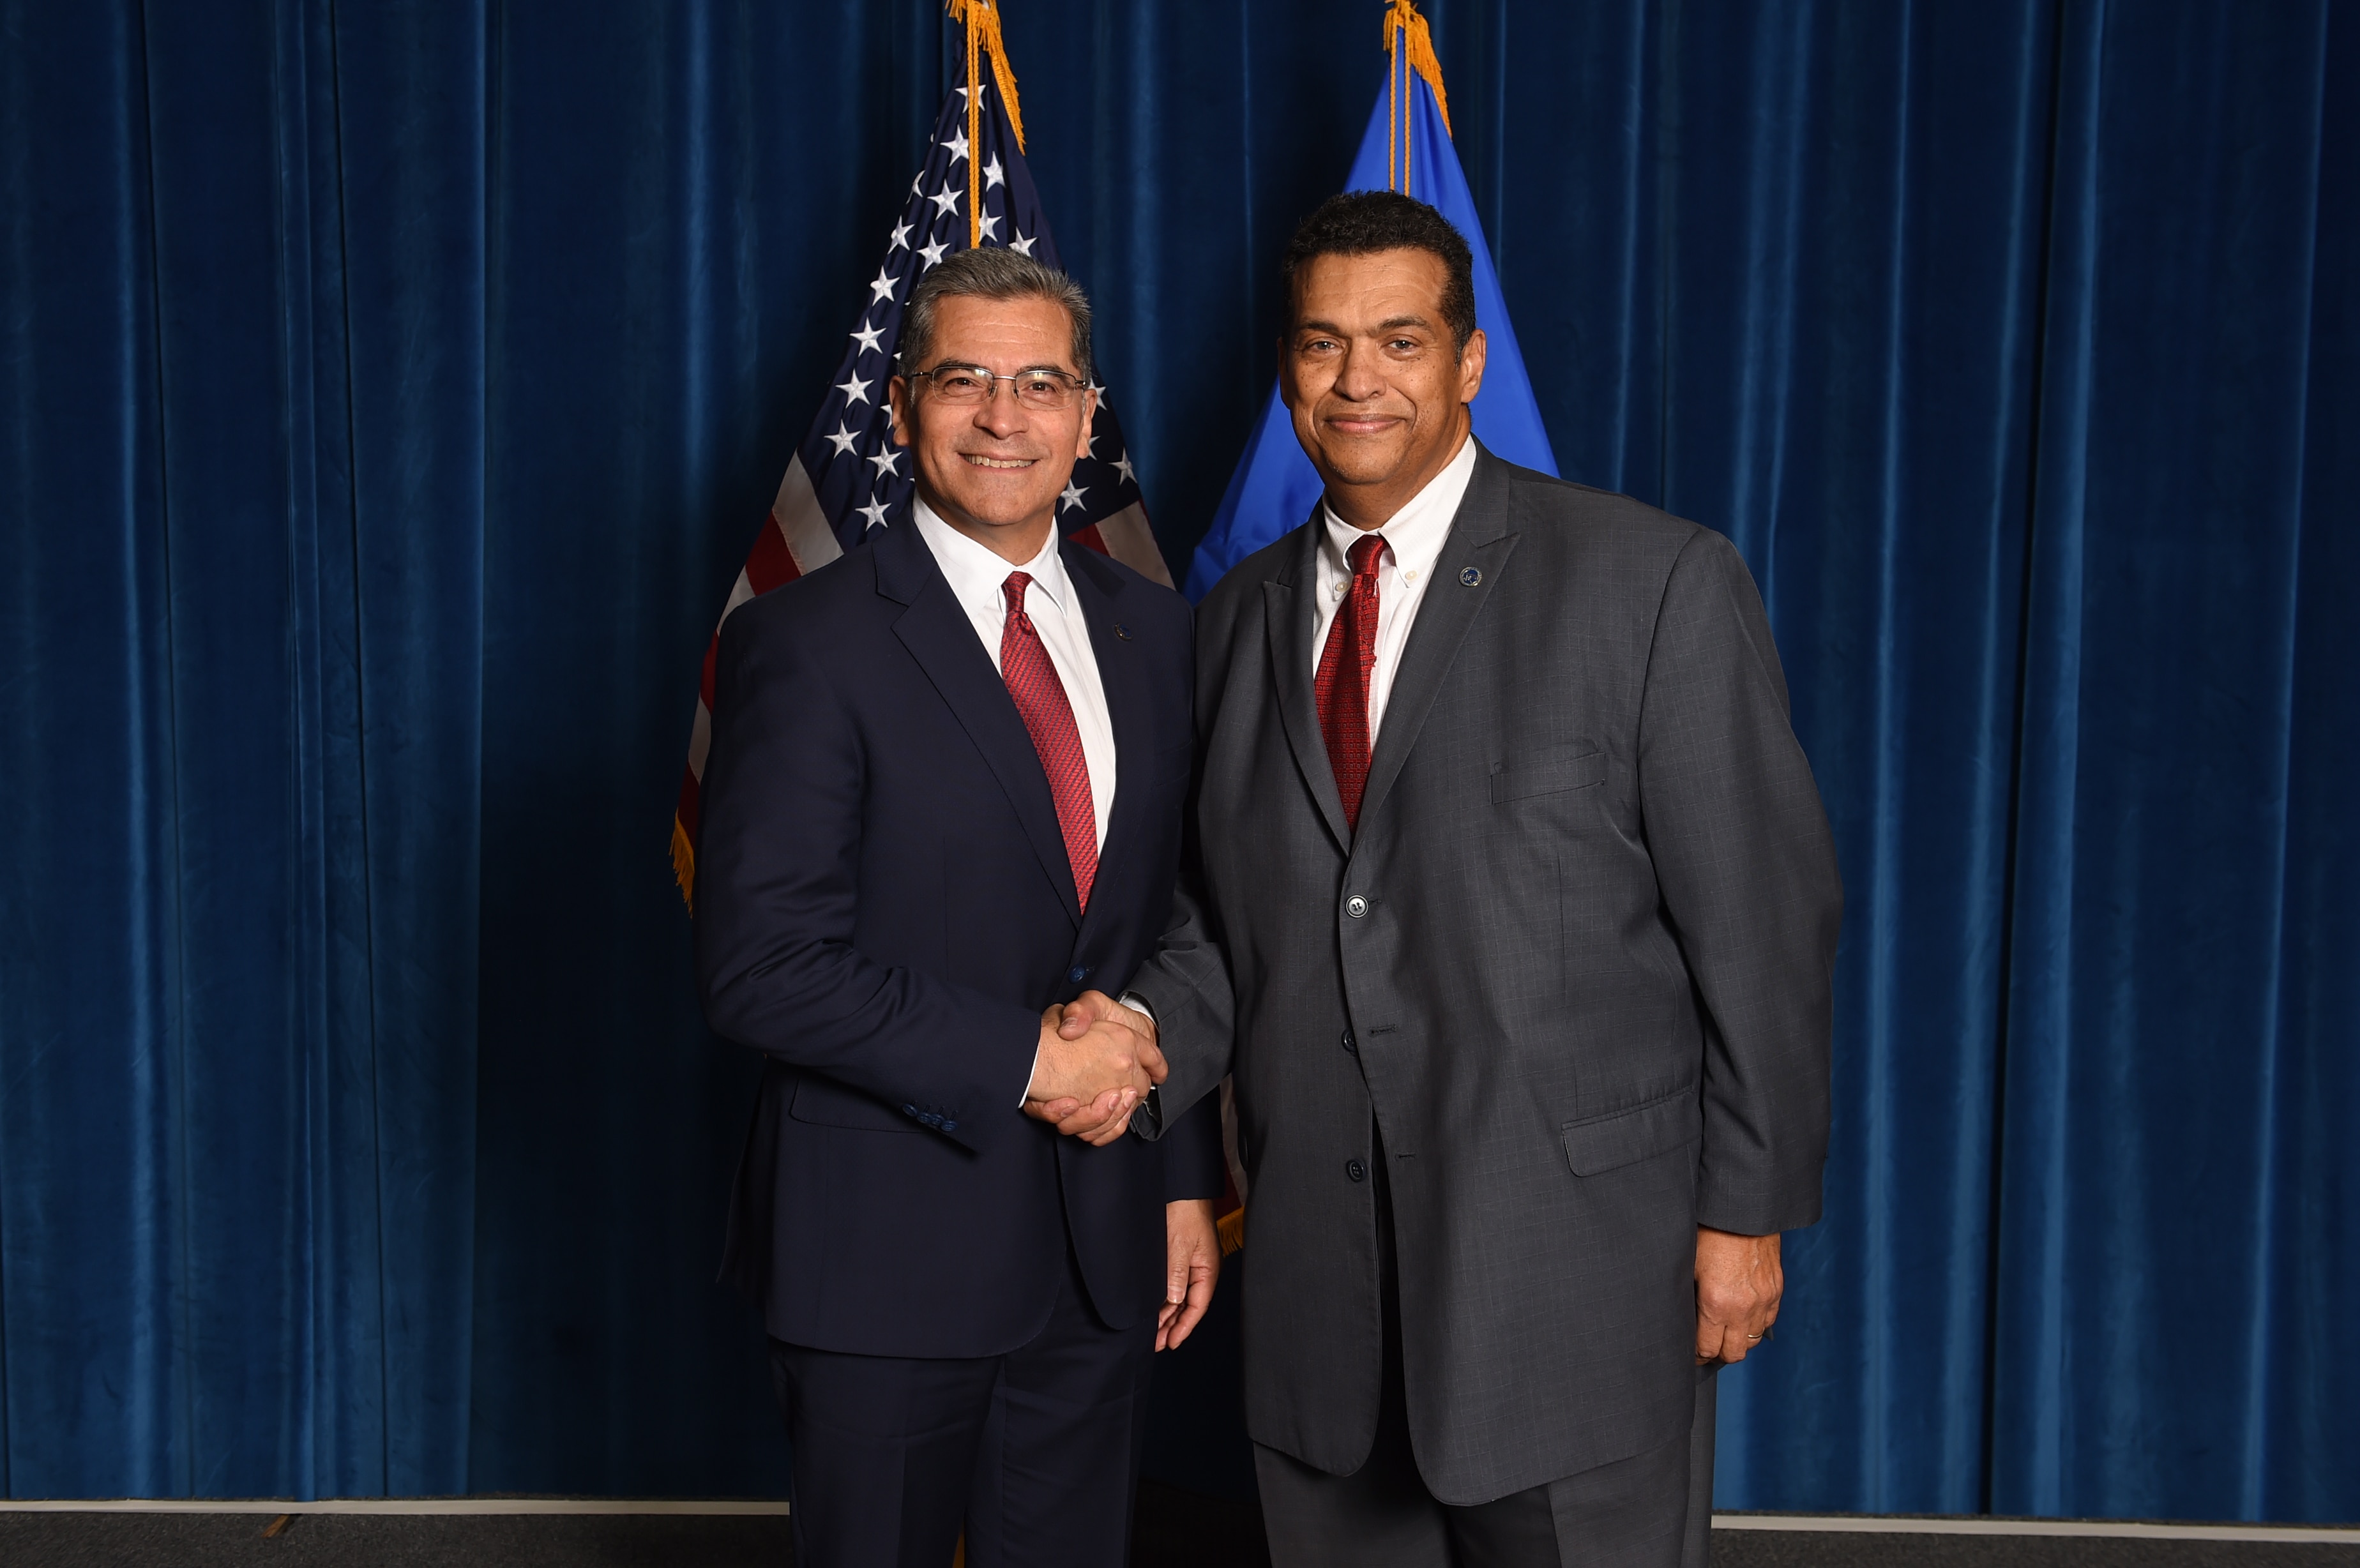 Pictured here: Secretary Becerra and Chris Smith posing at the 2022 staff holiday party.